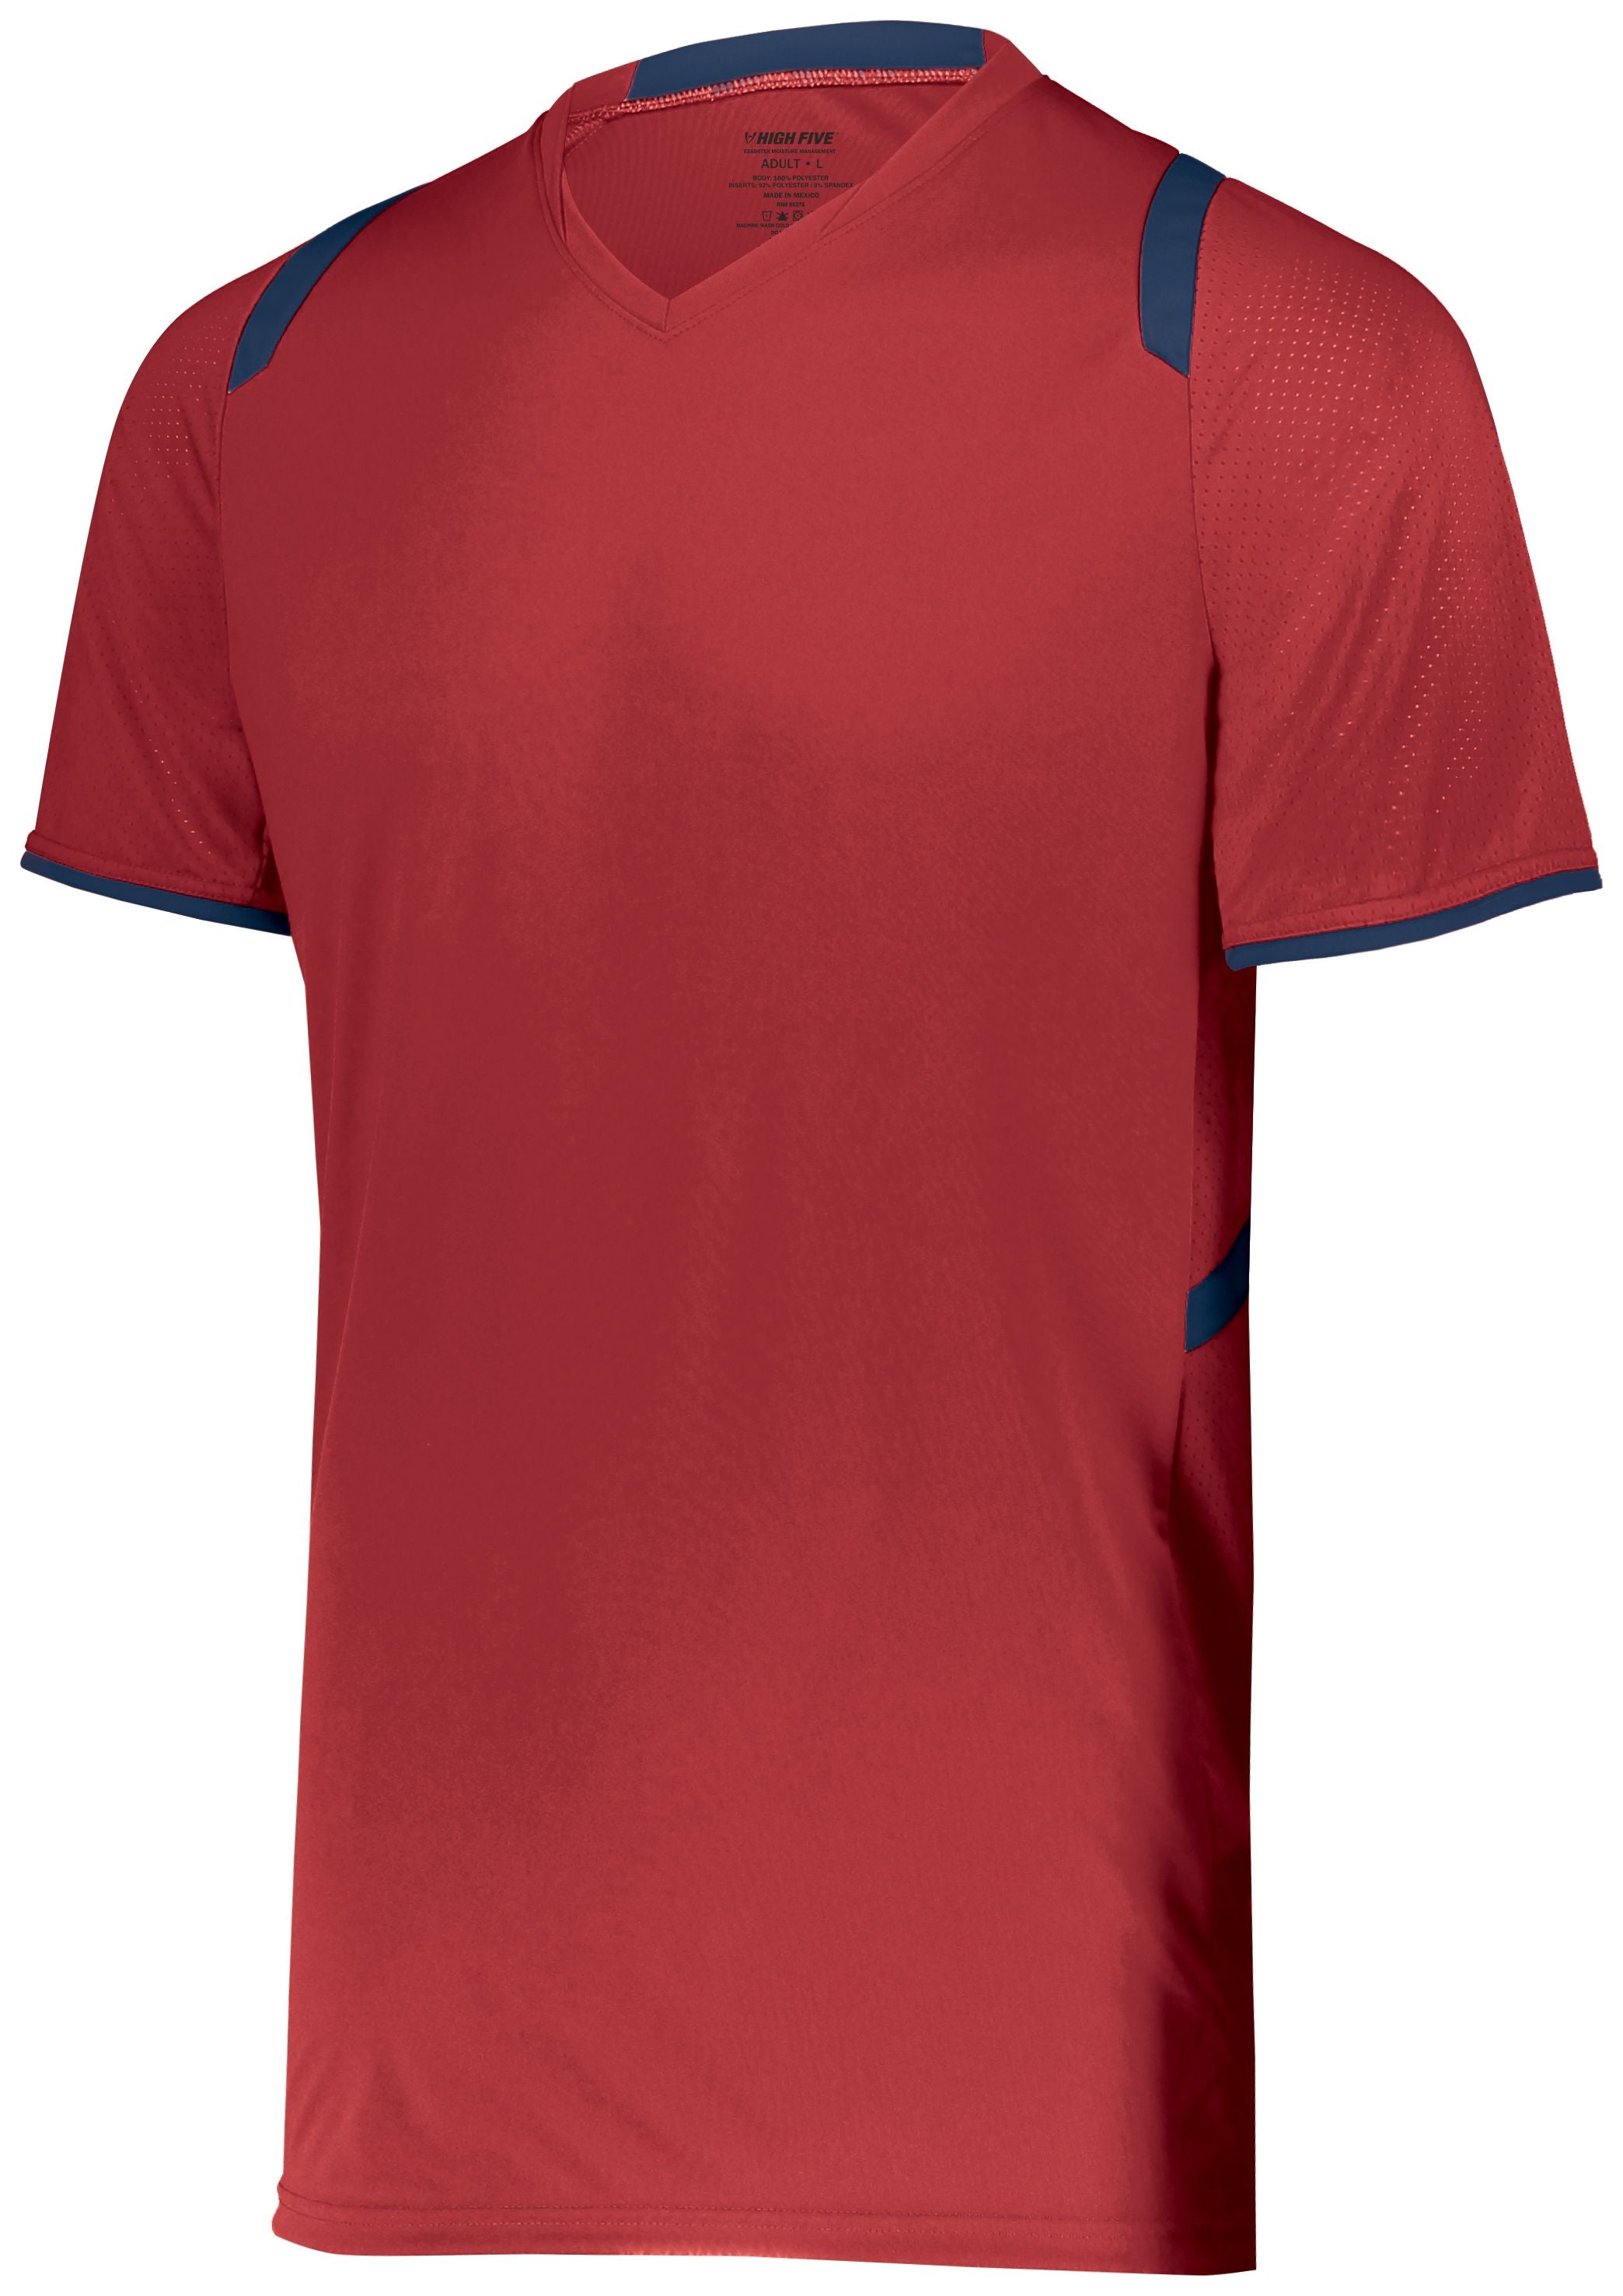 High 5 Youth Millennium Soccer Jersey in Scarlet/Navy  -Part of the Youth, Youth-Jersey, High5-Products, Soccer, Shirts, All-Sports-1 product lines at KanaleyCreations.com